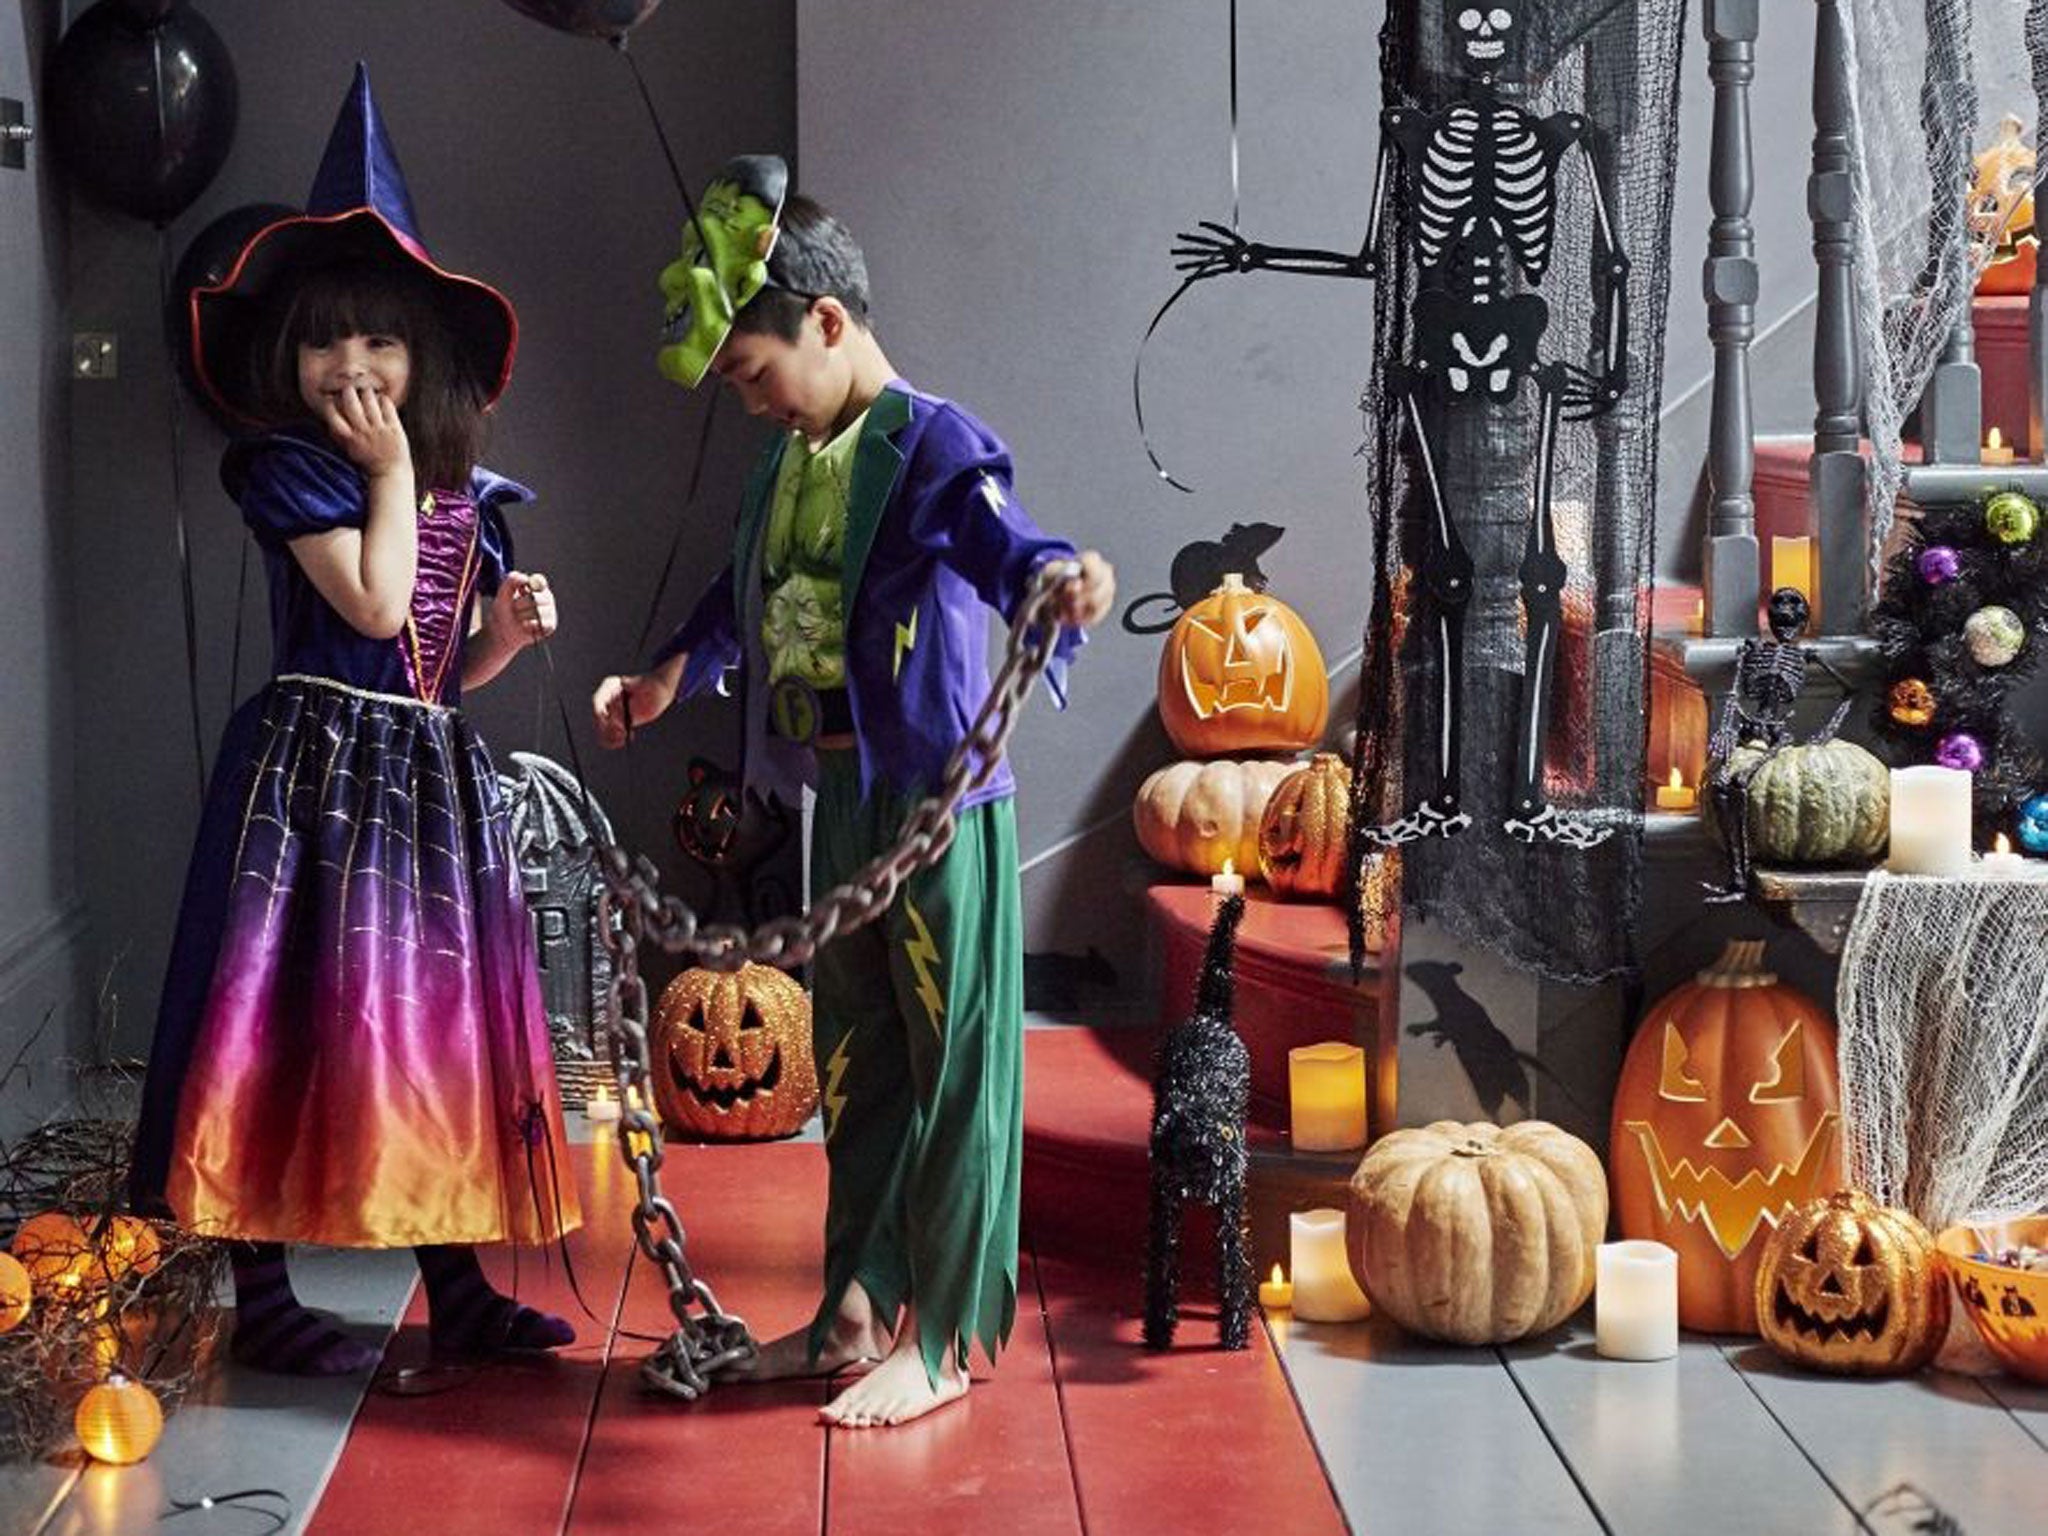 All Tu clothing at Sainsbury’s – including Halloween costumes – is being sold at 25 per cent off until Monday 2 November